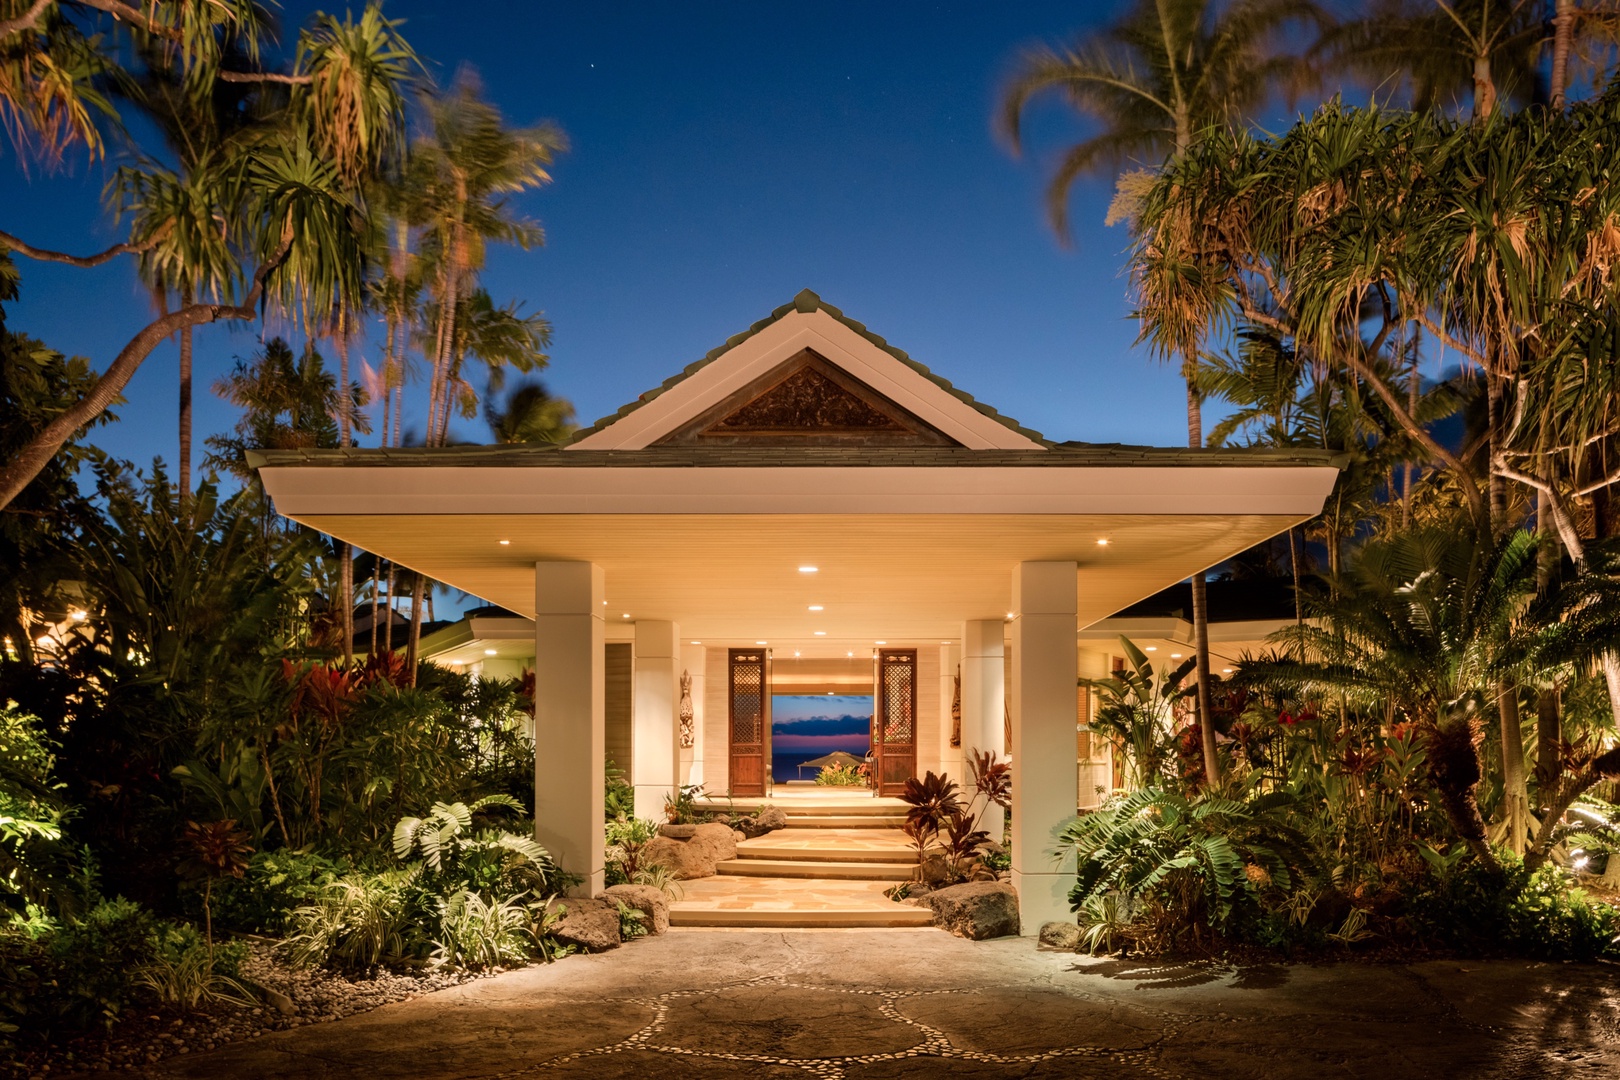 Kamuela Vacation Rentals, 5BD Fairways North (1) Estate Home at Mauna Kea Resort - Grand entryway with tropical landscaping lit up at twilight.